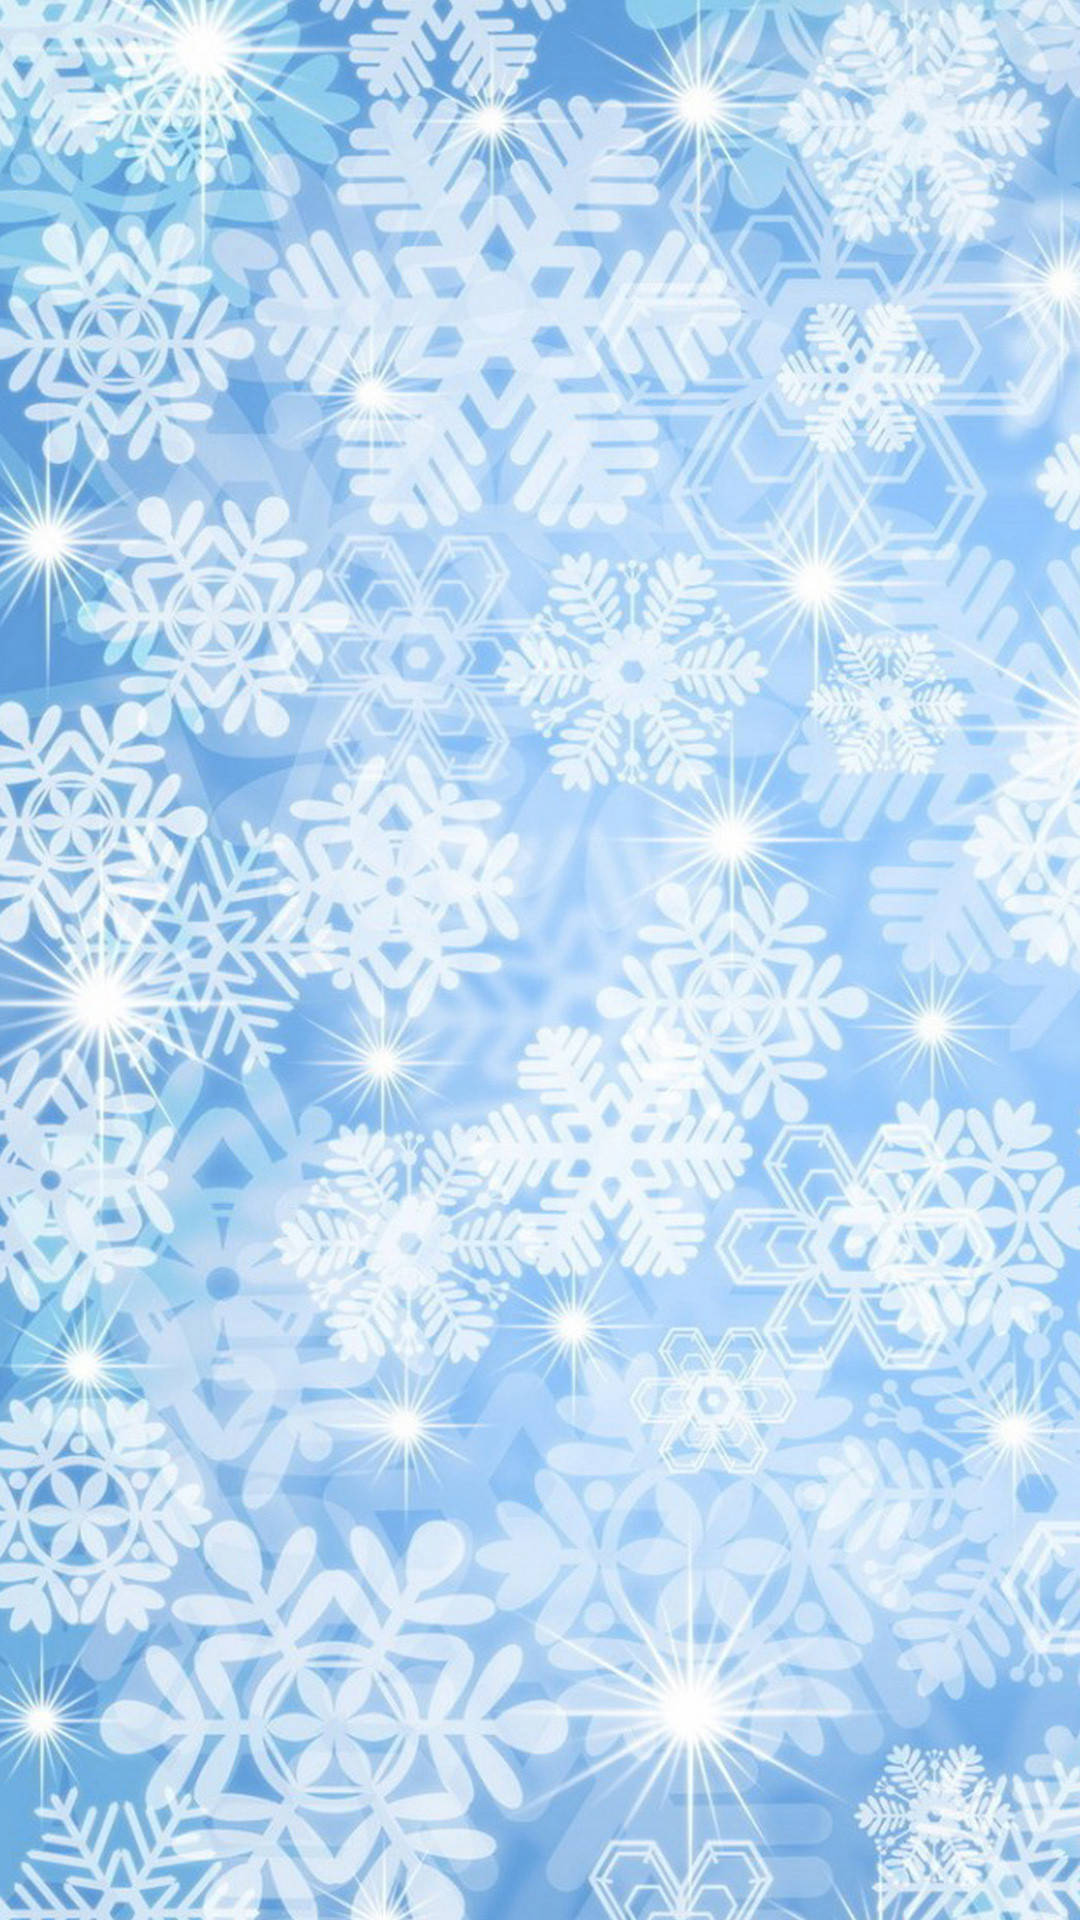 A Snowflake Shimmering on an Iphone Screen Wallpaper